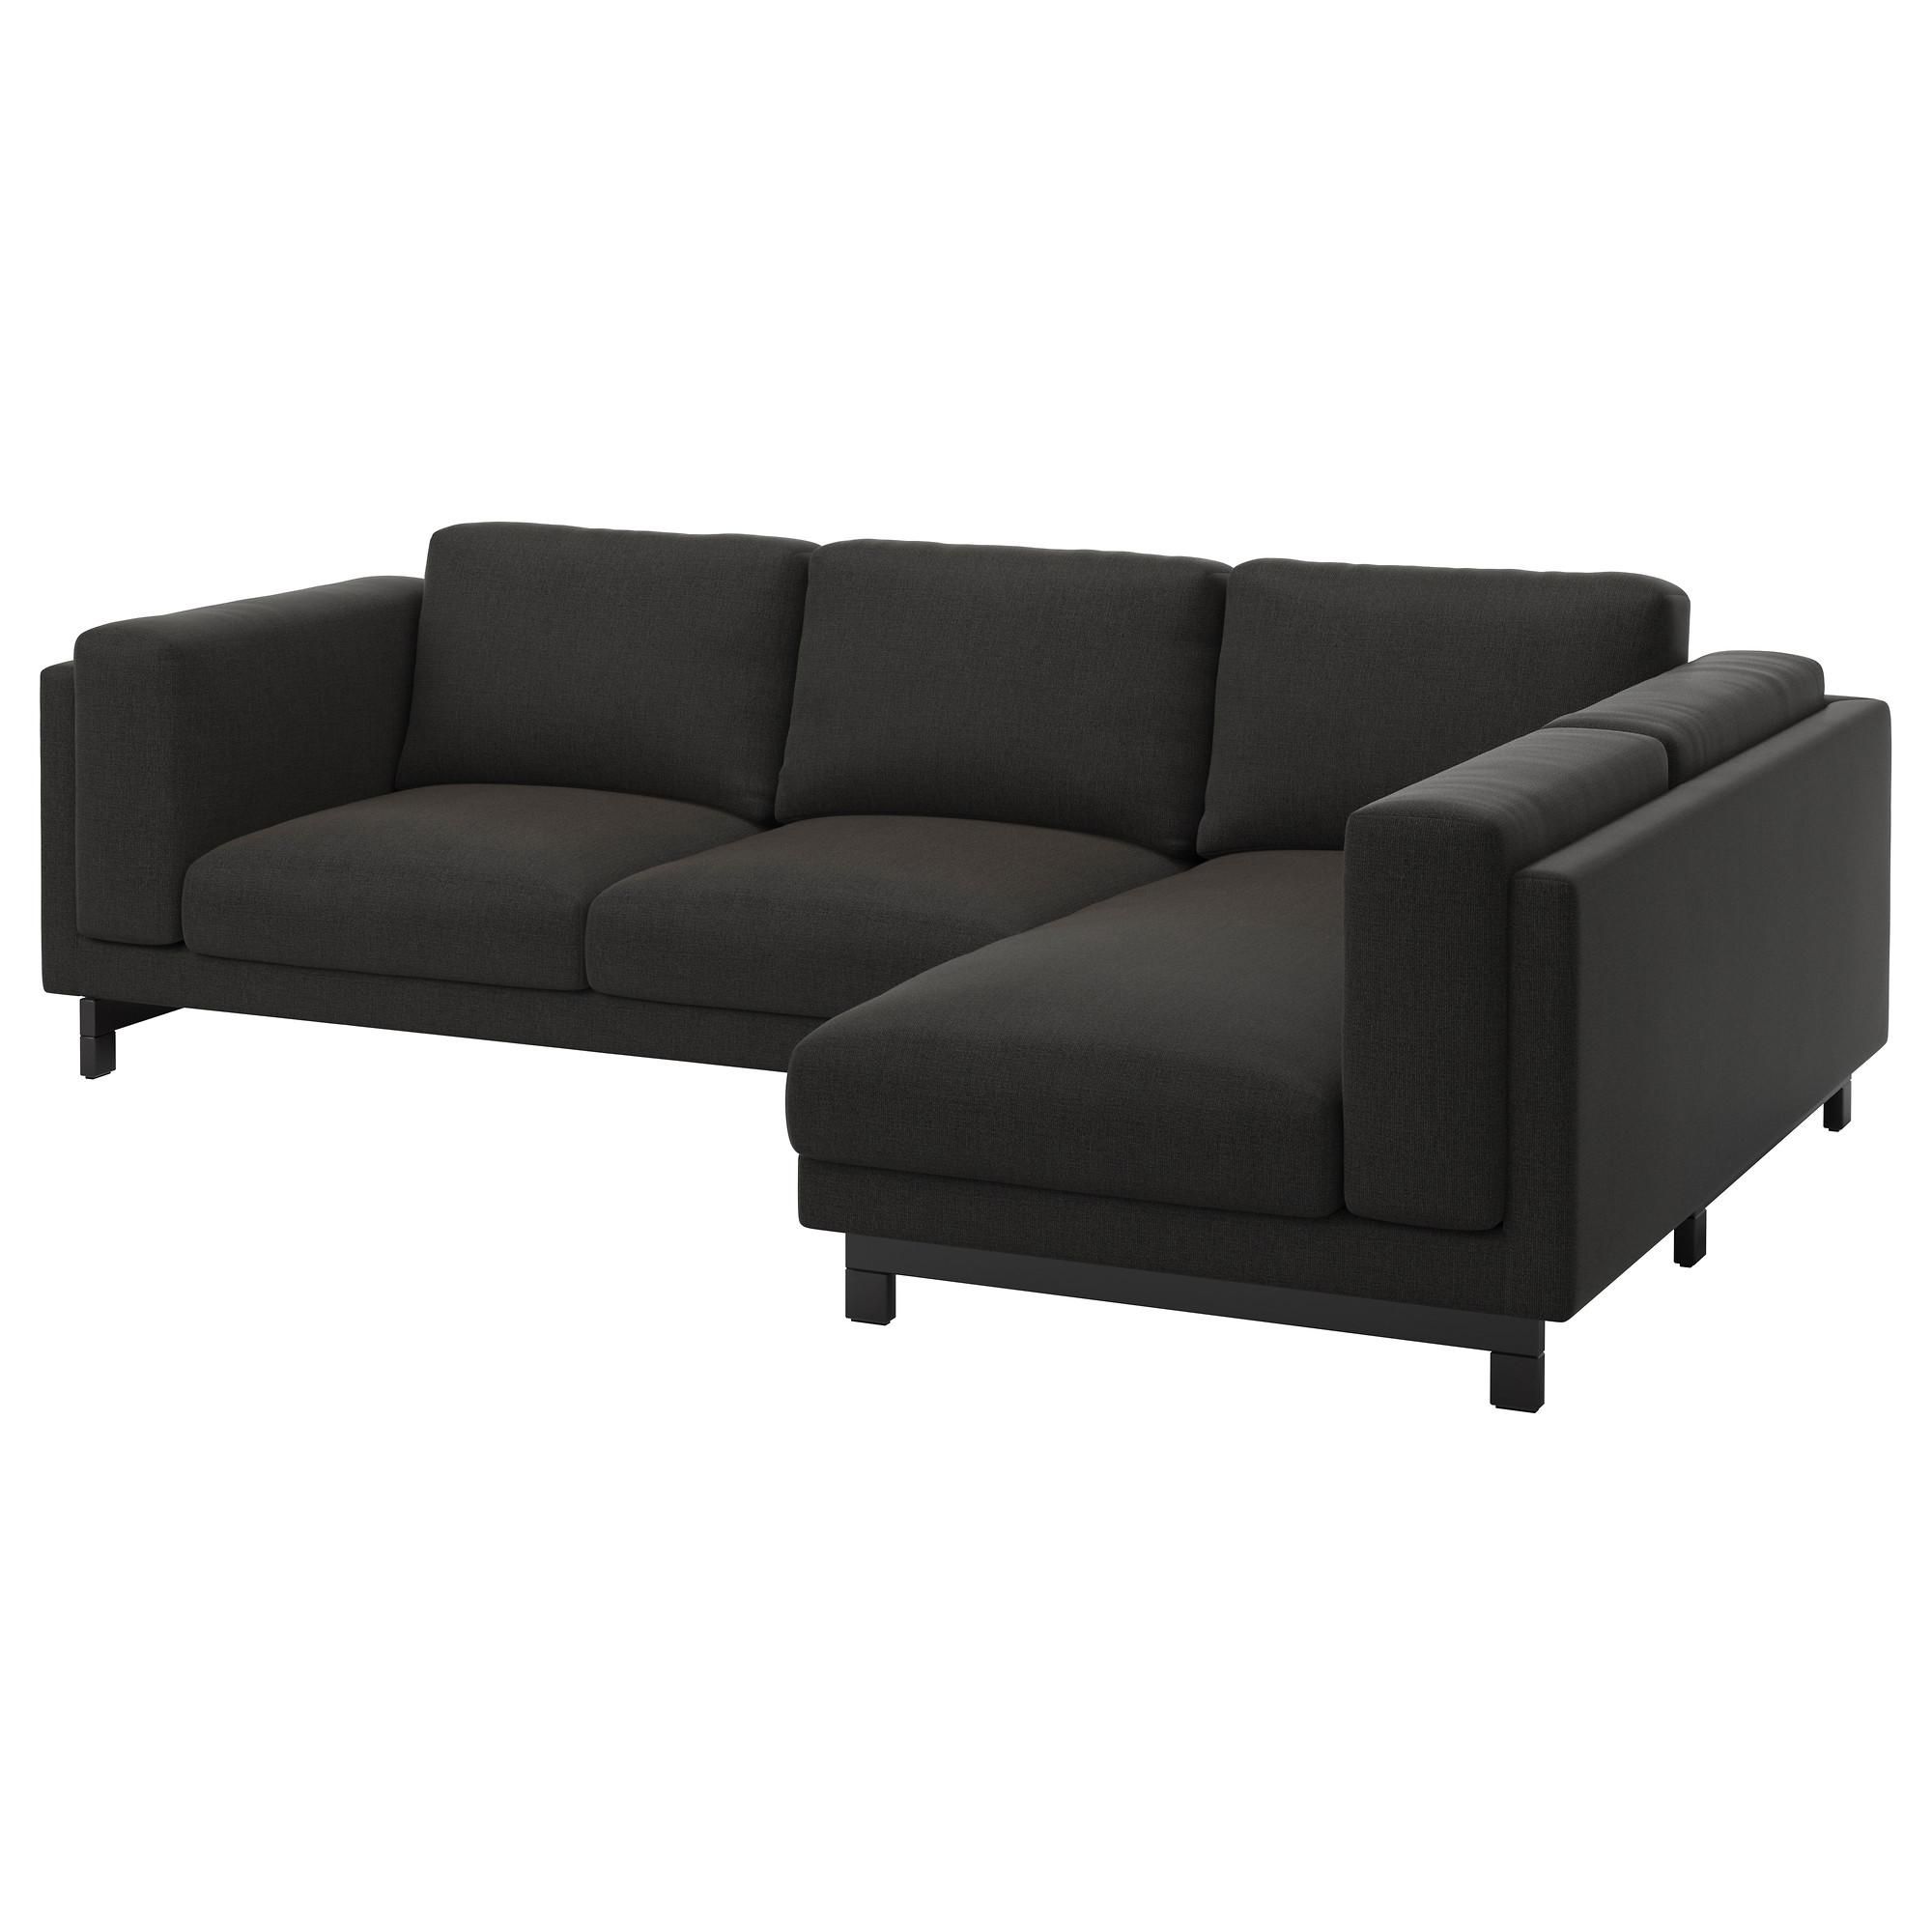 3 Seater Sofa | Ikea For 3 Seater Sofas For Sale (Photo 15 of 21)